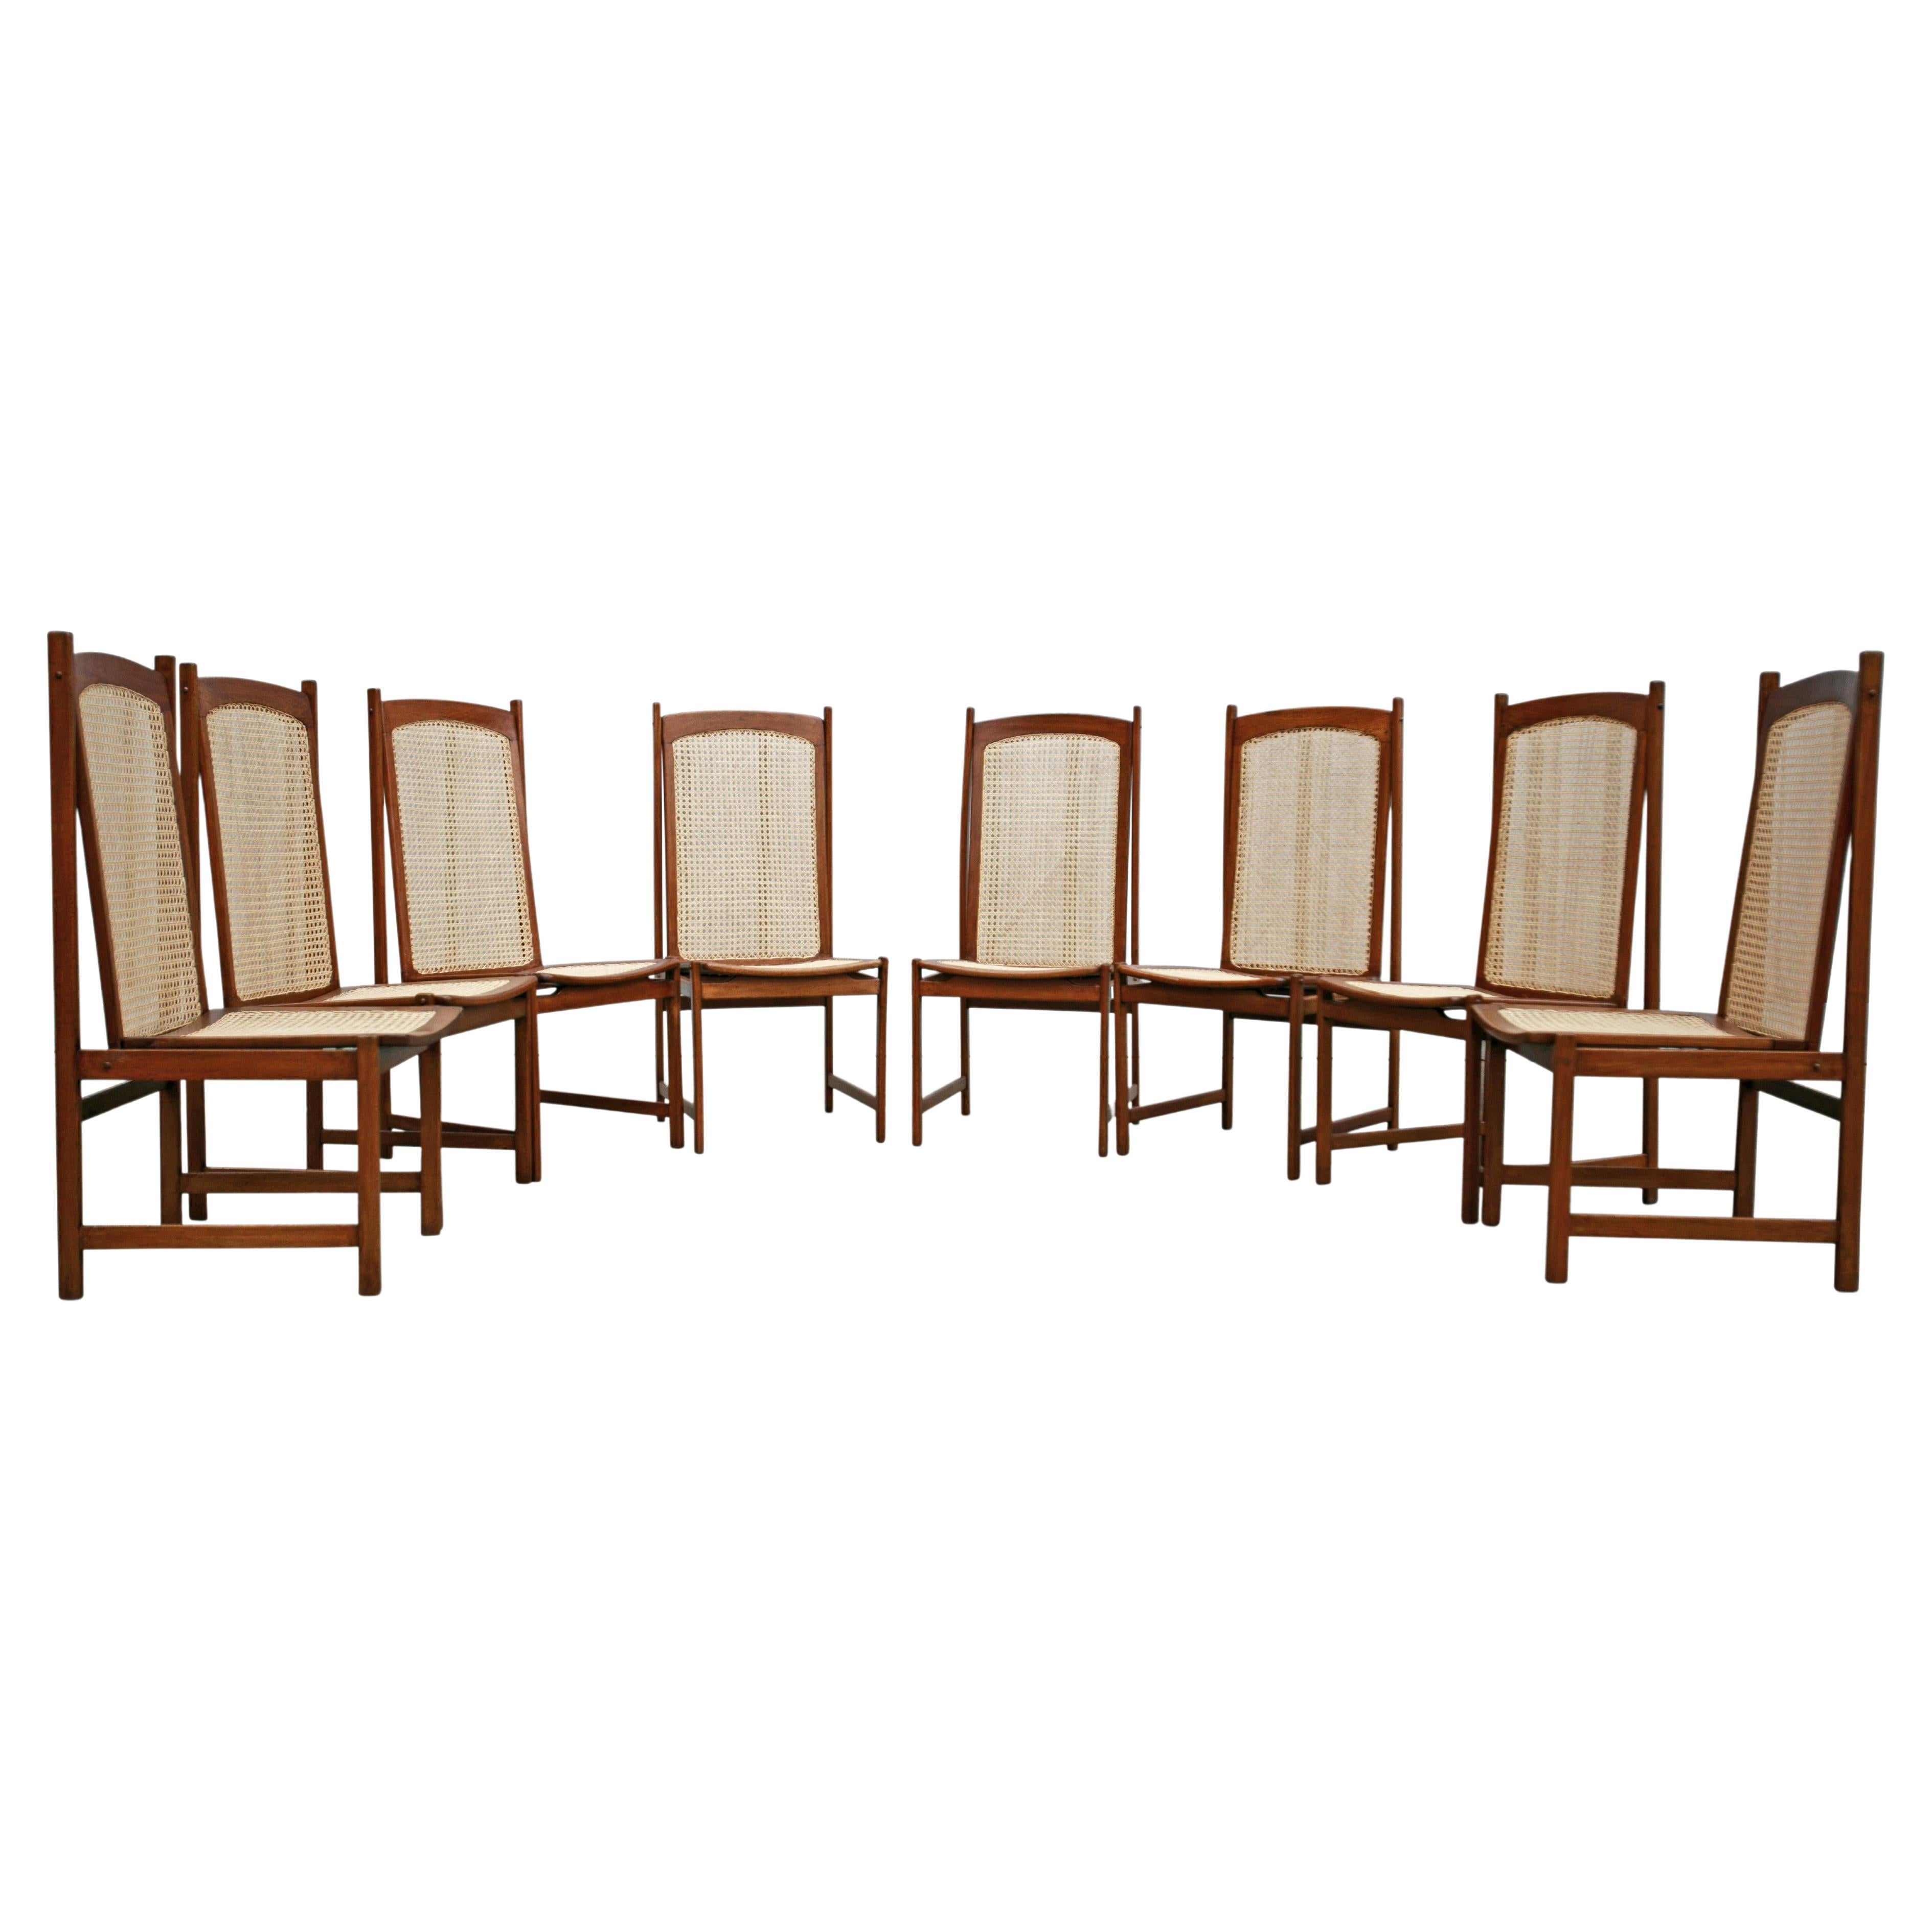 Available today, this spectacular Brazilian modern dining chair set made in Hardwood and Cane, by Celina Decoracoes, in the sixties is nothing less than spectacular.
 
Each chair features a Cerejera wood structure with four legs, curved seat and a